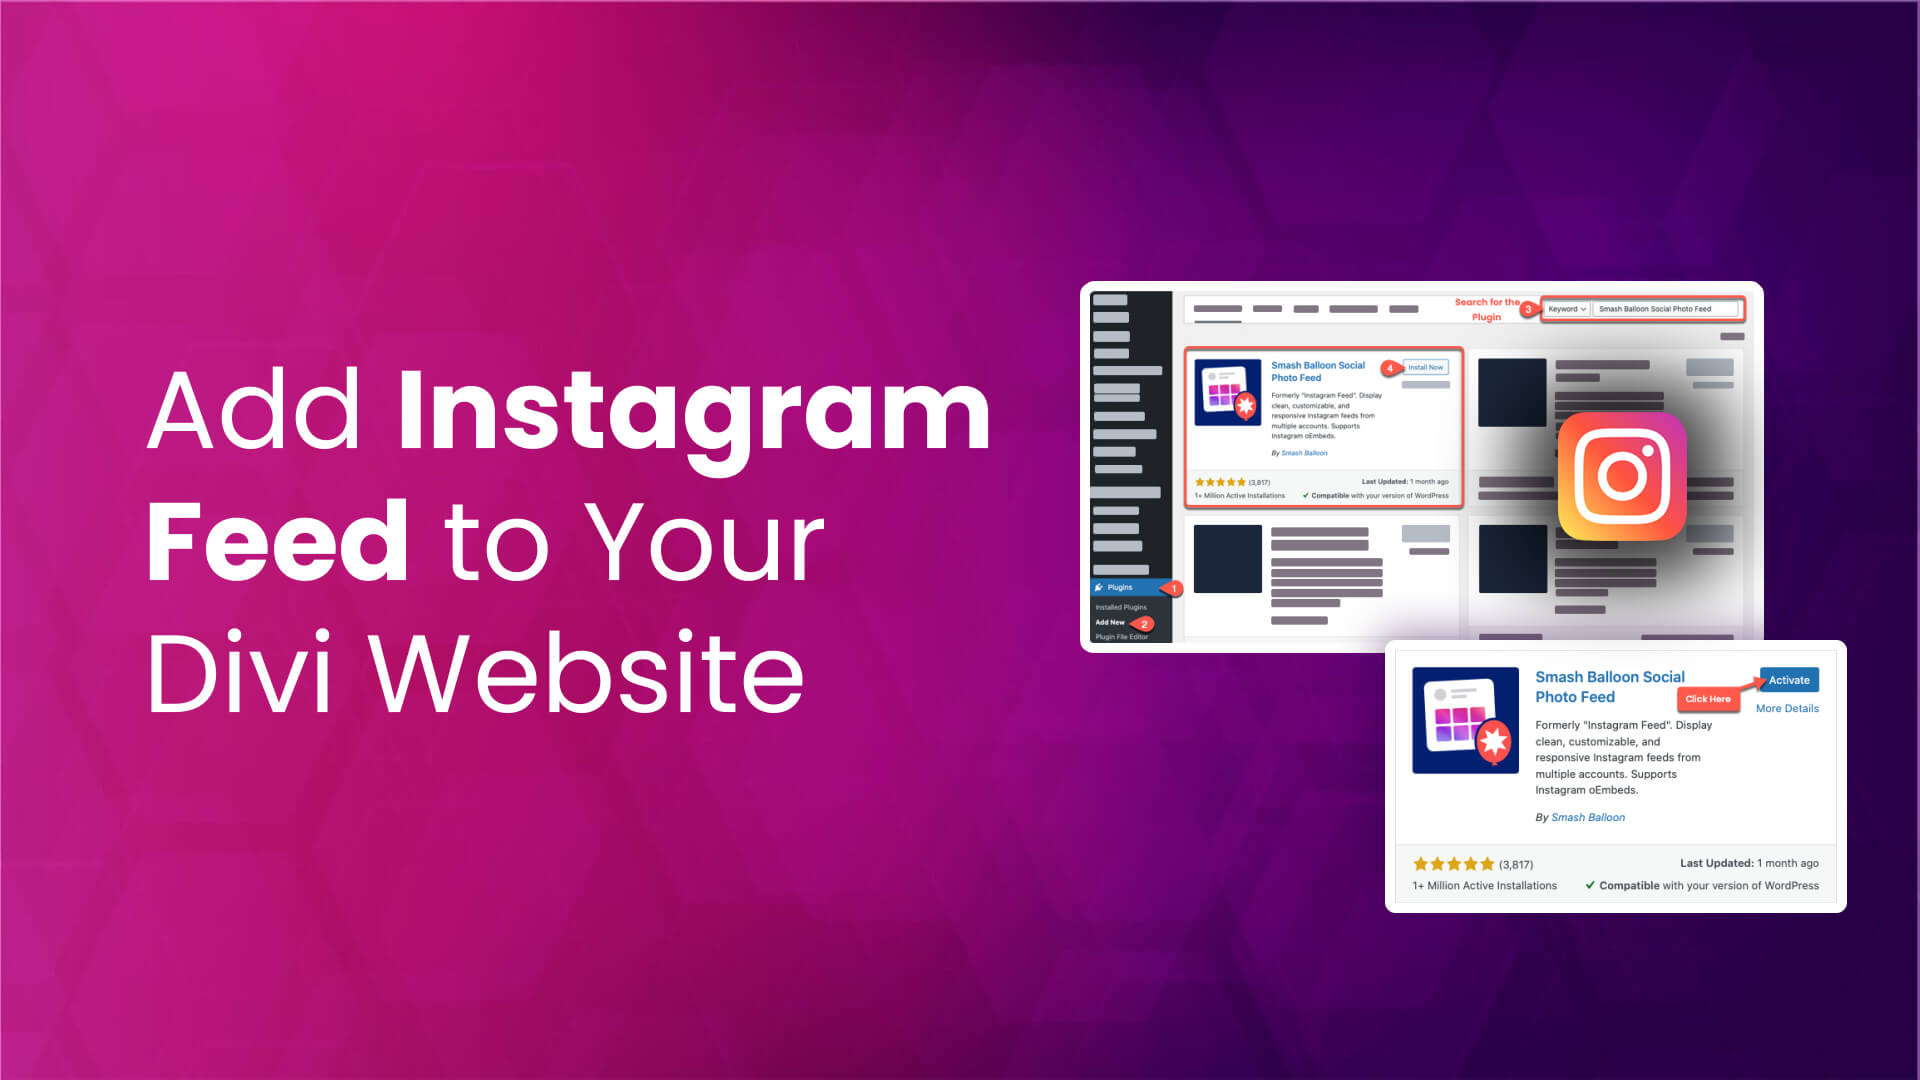 Add Instagram Feed to Your Divi Website